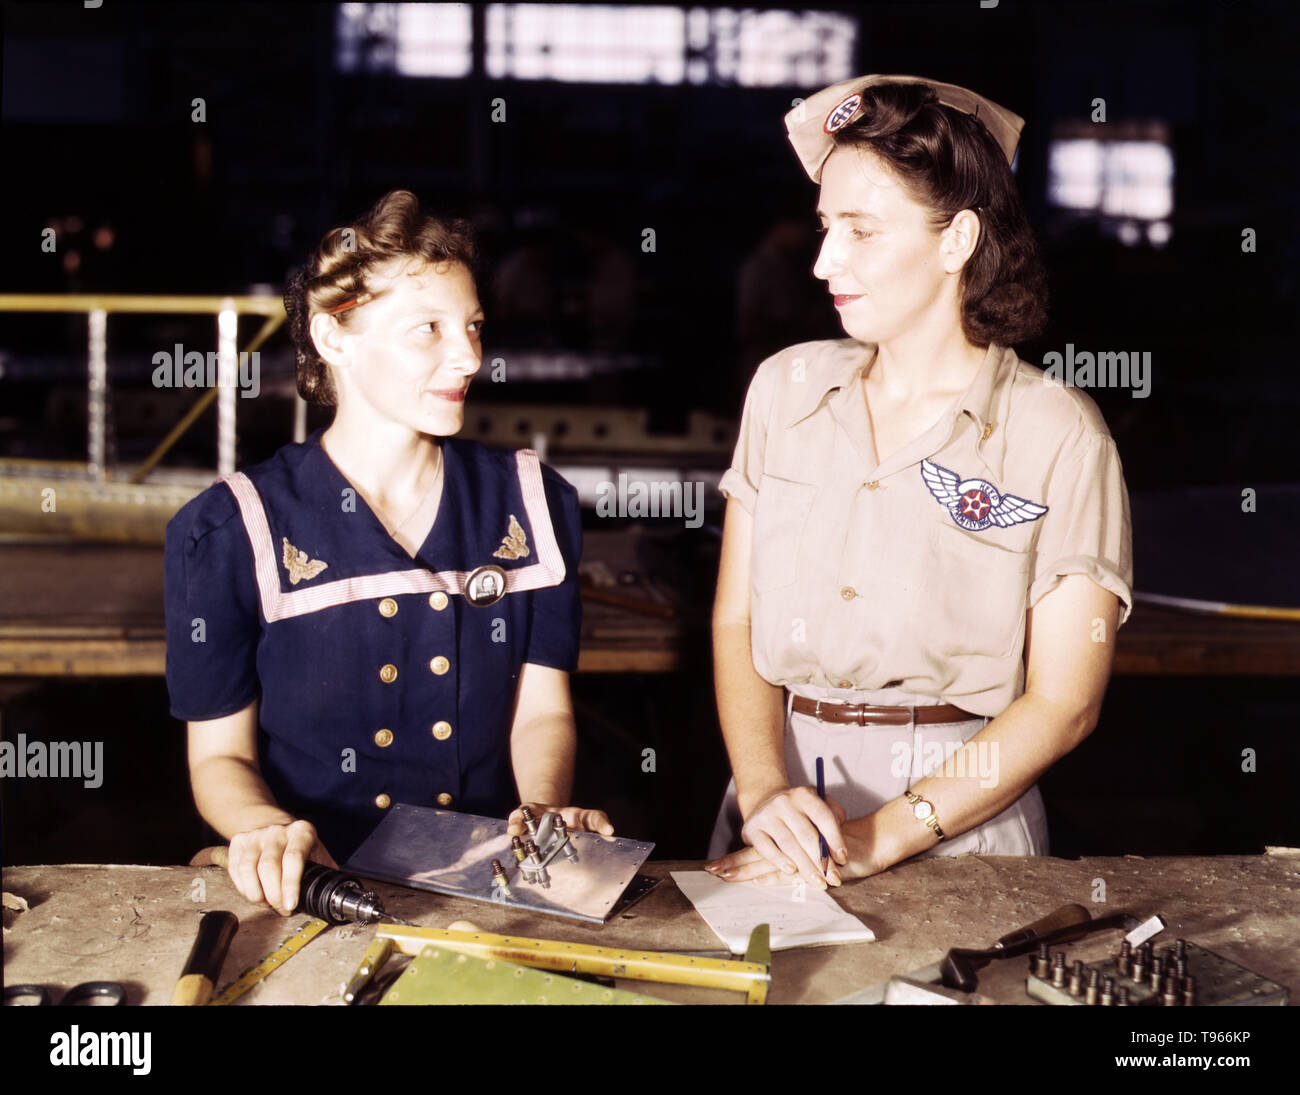 Pearl Harbor widows have gone into war work to carry on the fight with a personal vengeance, Corpus Christi, Texas. Mrs. Virginia Young (right) whose husband was one of the first casualties of WWII, is a supervisor in the Assembly and Repairs Department of the Naval Air Base. Her job is to find convenient and comfortable living quarters for women workers from out of the state, like Ethel Mann, who operates an electric drill.  Photographed by Howard R. Hollem, 1942. Stock Photo